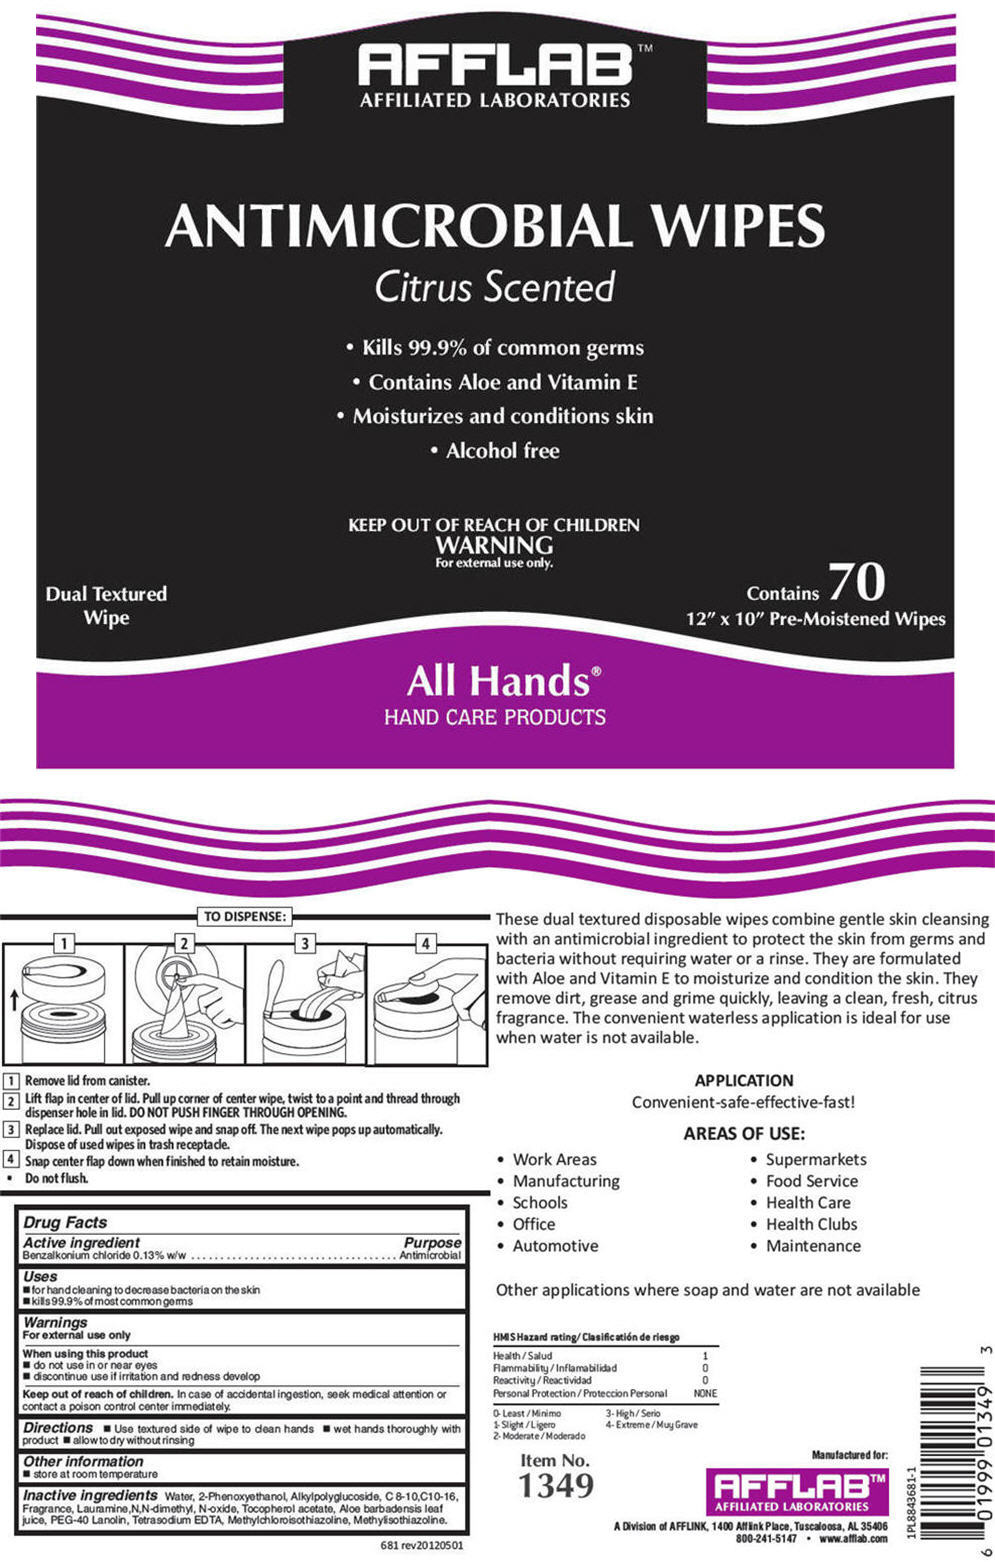 Antimicrobial Wipes Citrus Scented (Benzalkonium Chloride) Cloth [Afflabs, Affiliated Laboratories, A Division Of Afflink]